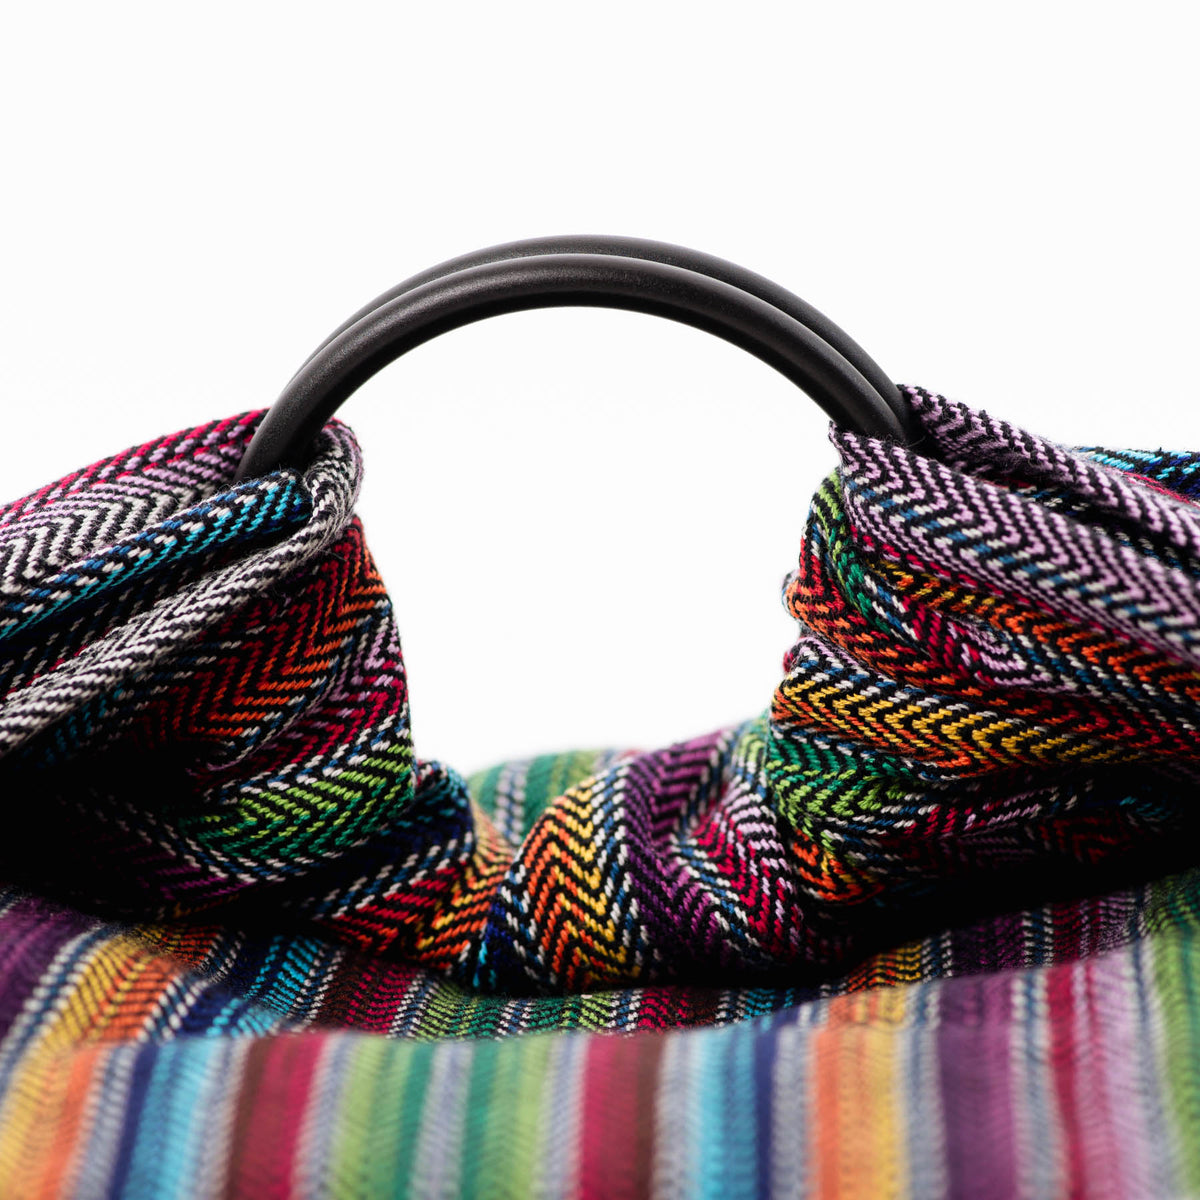 Ringsling Totonicapan double weft